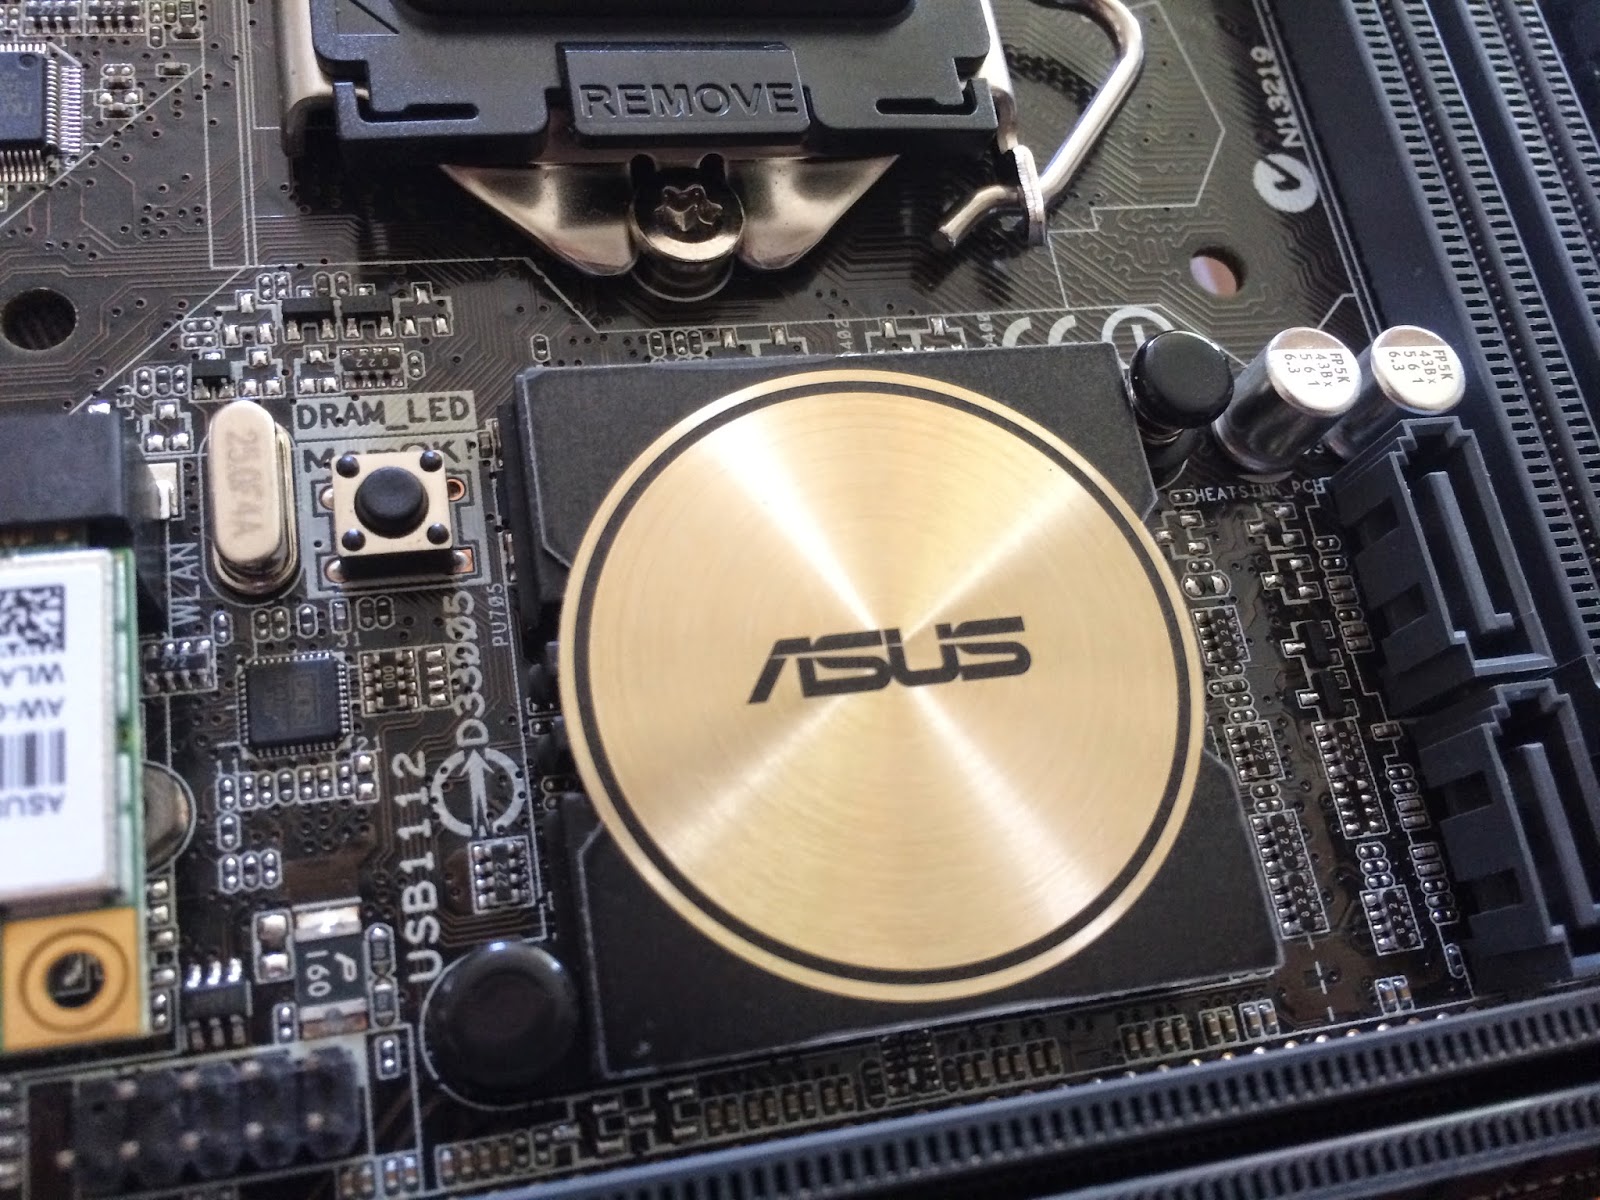 Unboxing & Review - ASUS Z97I-PLUS 300